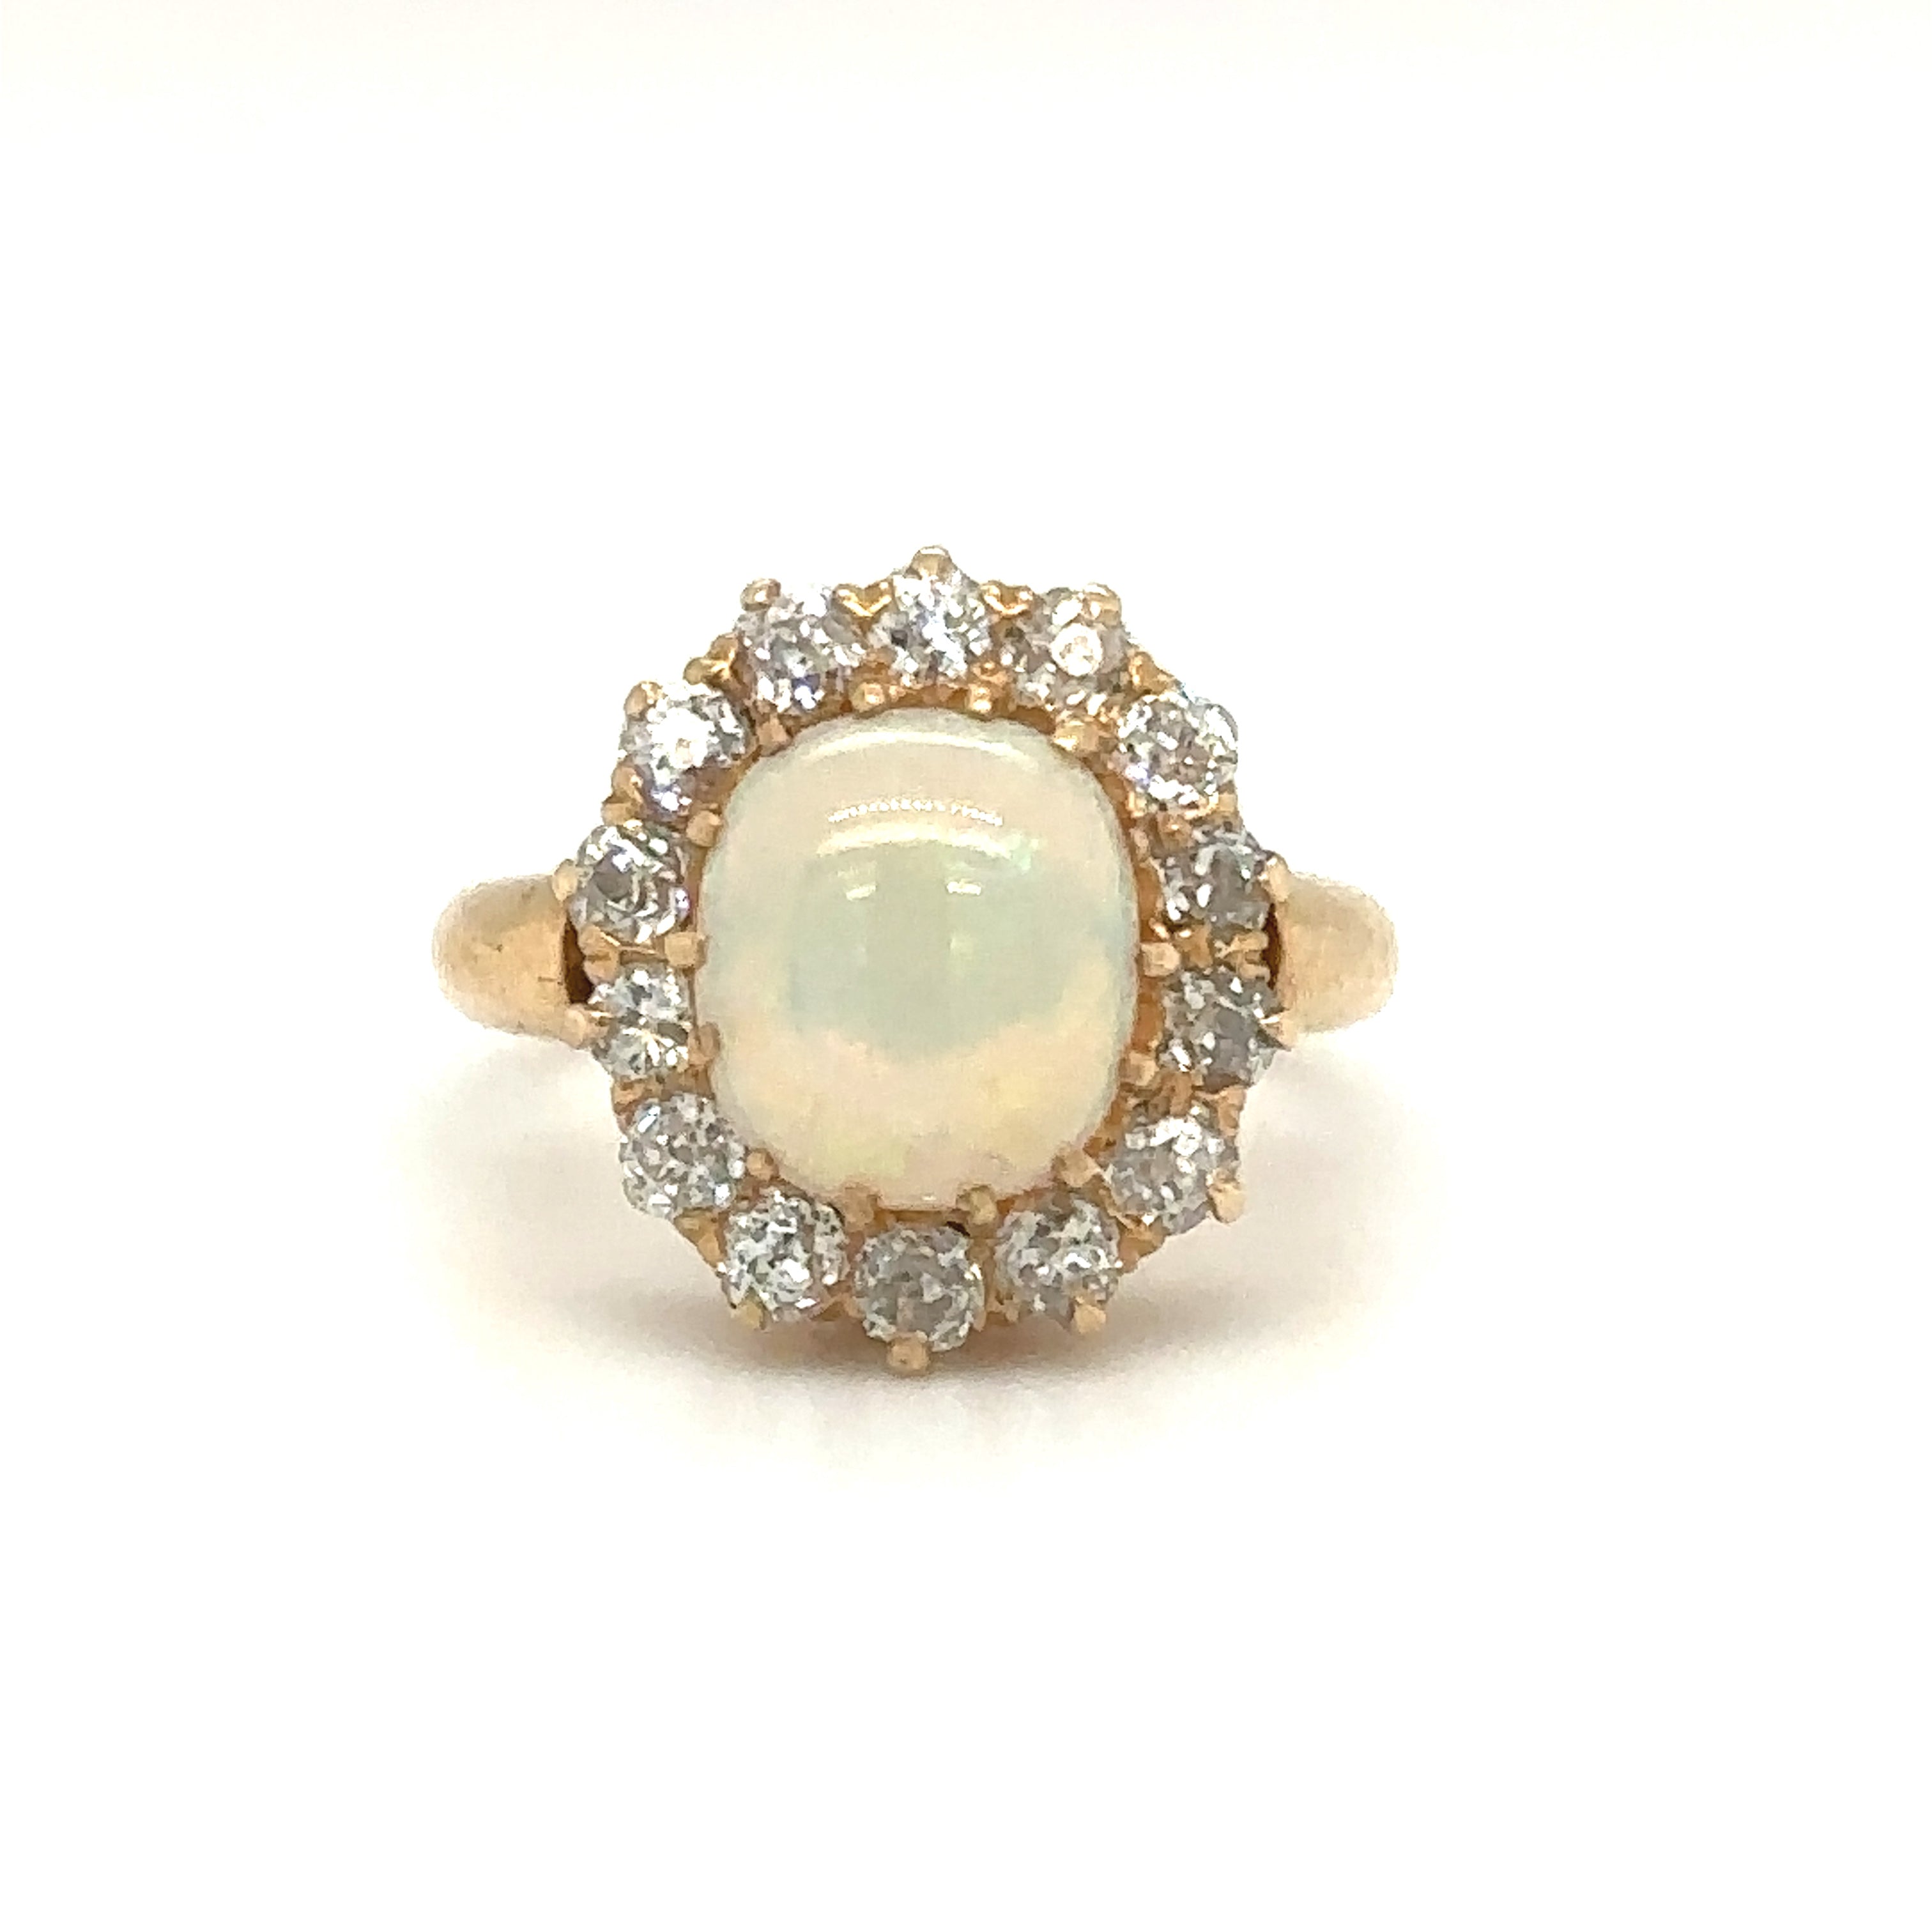 Circa 1920s French Made Oval Opal Ring with 0.80ctw Diamonds in 18K Gold